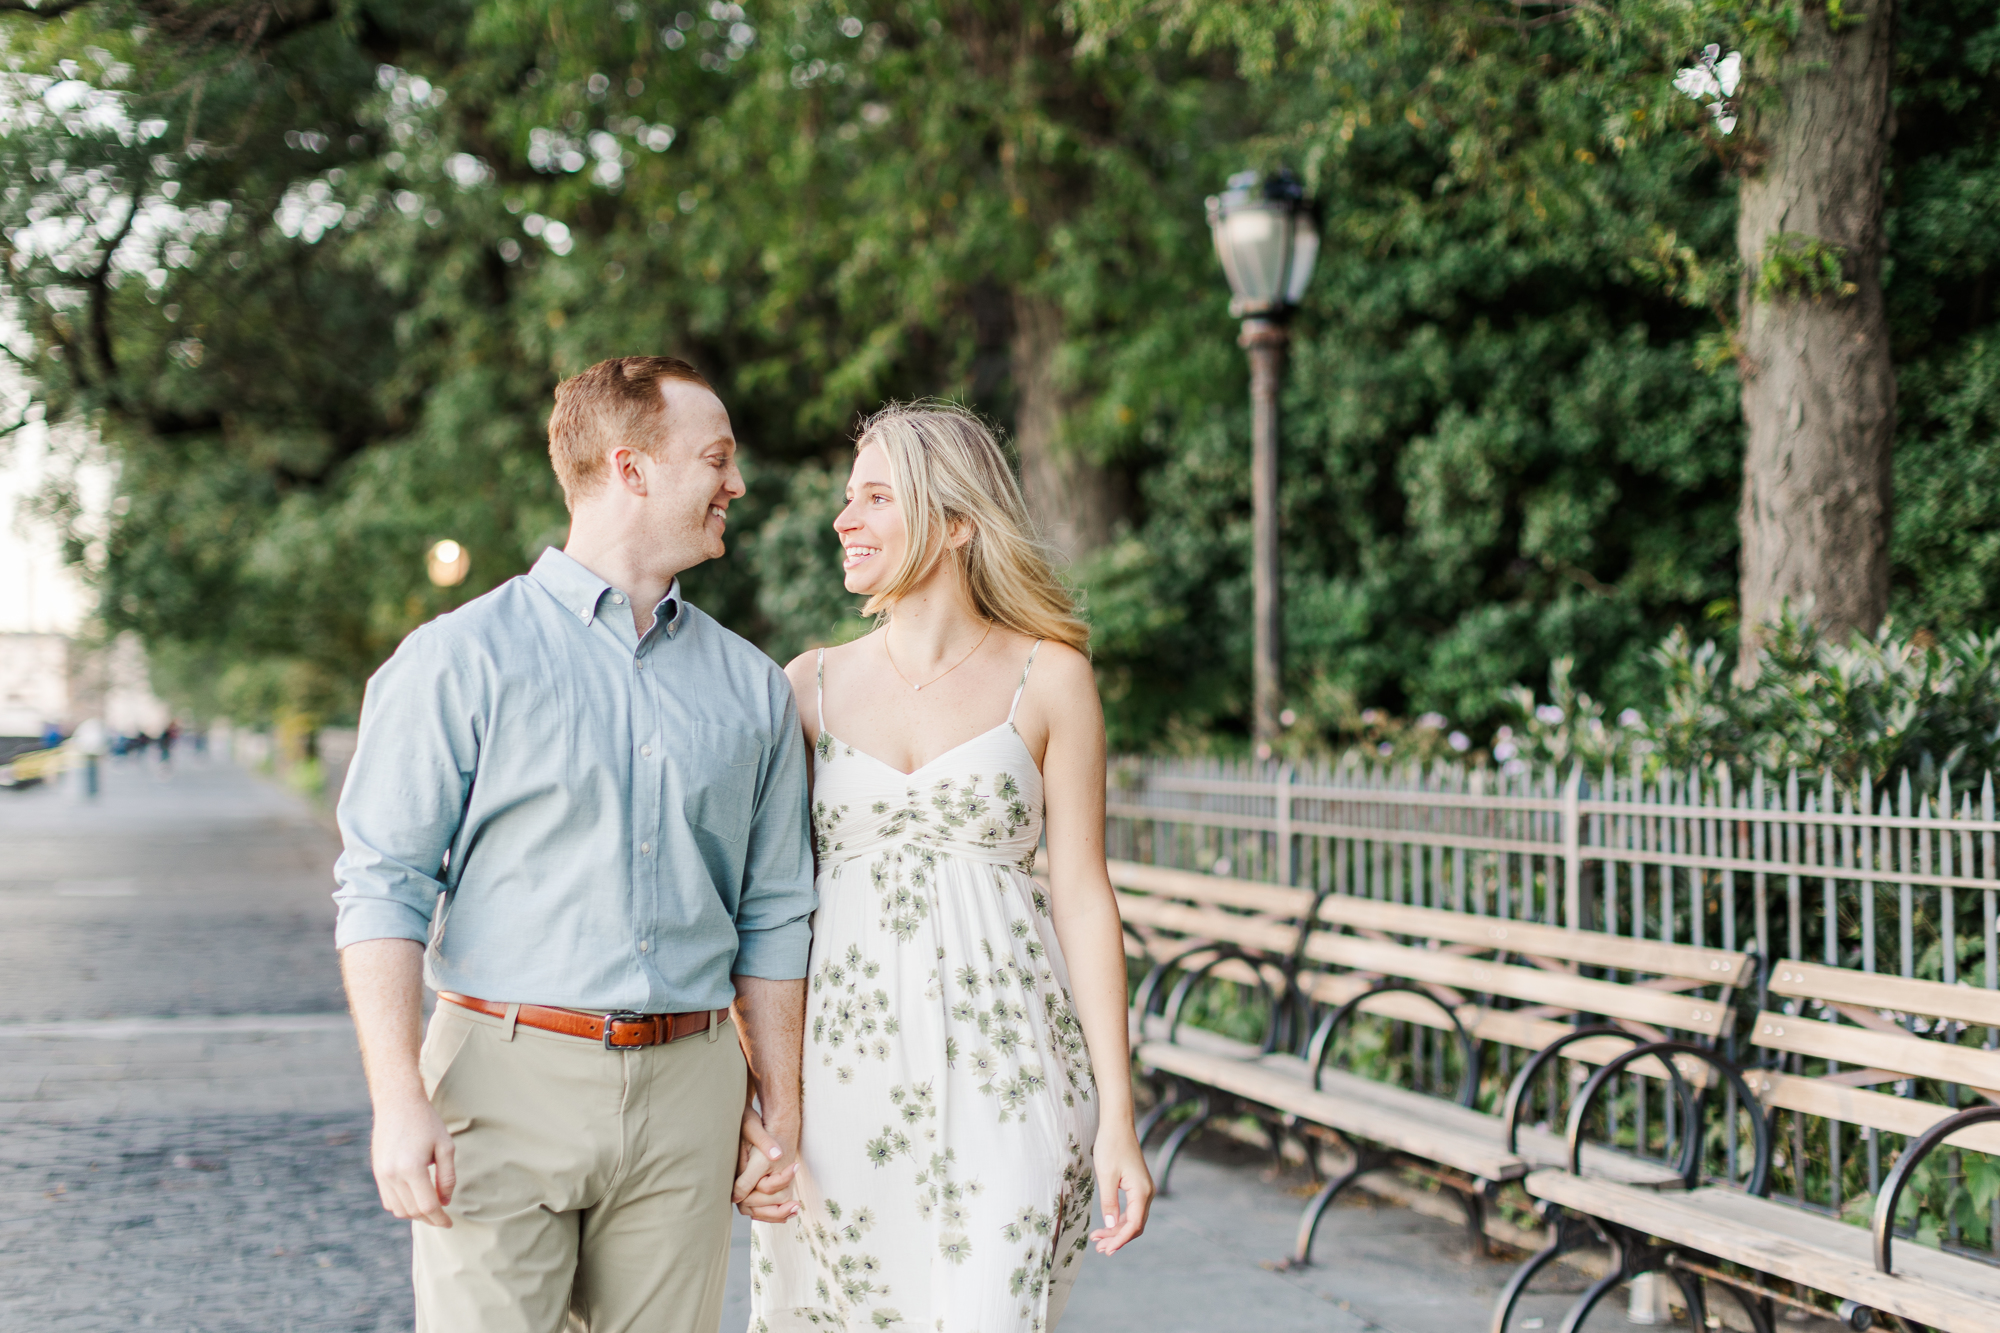 Dazzling Engagement Photos In Brooklyn Heights